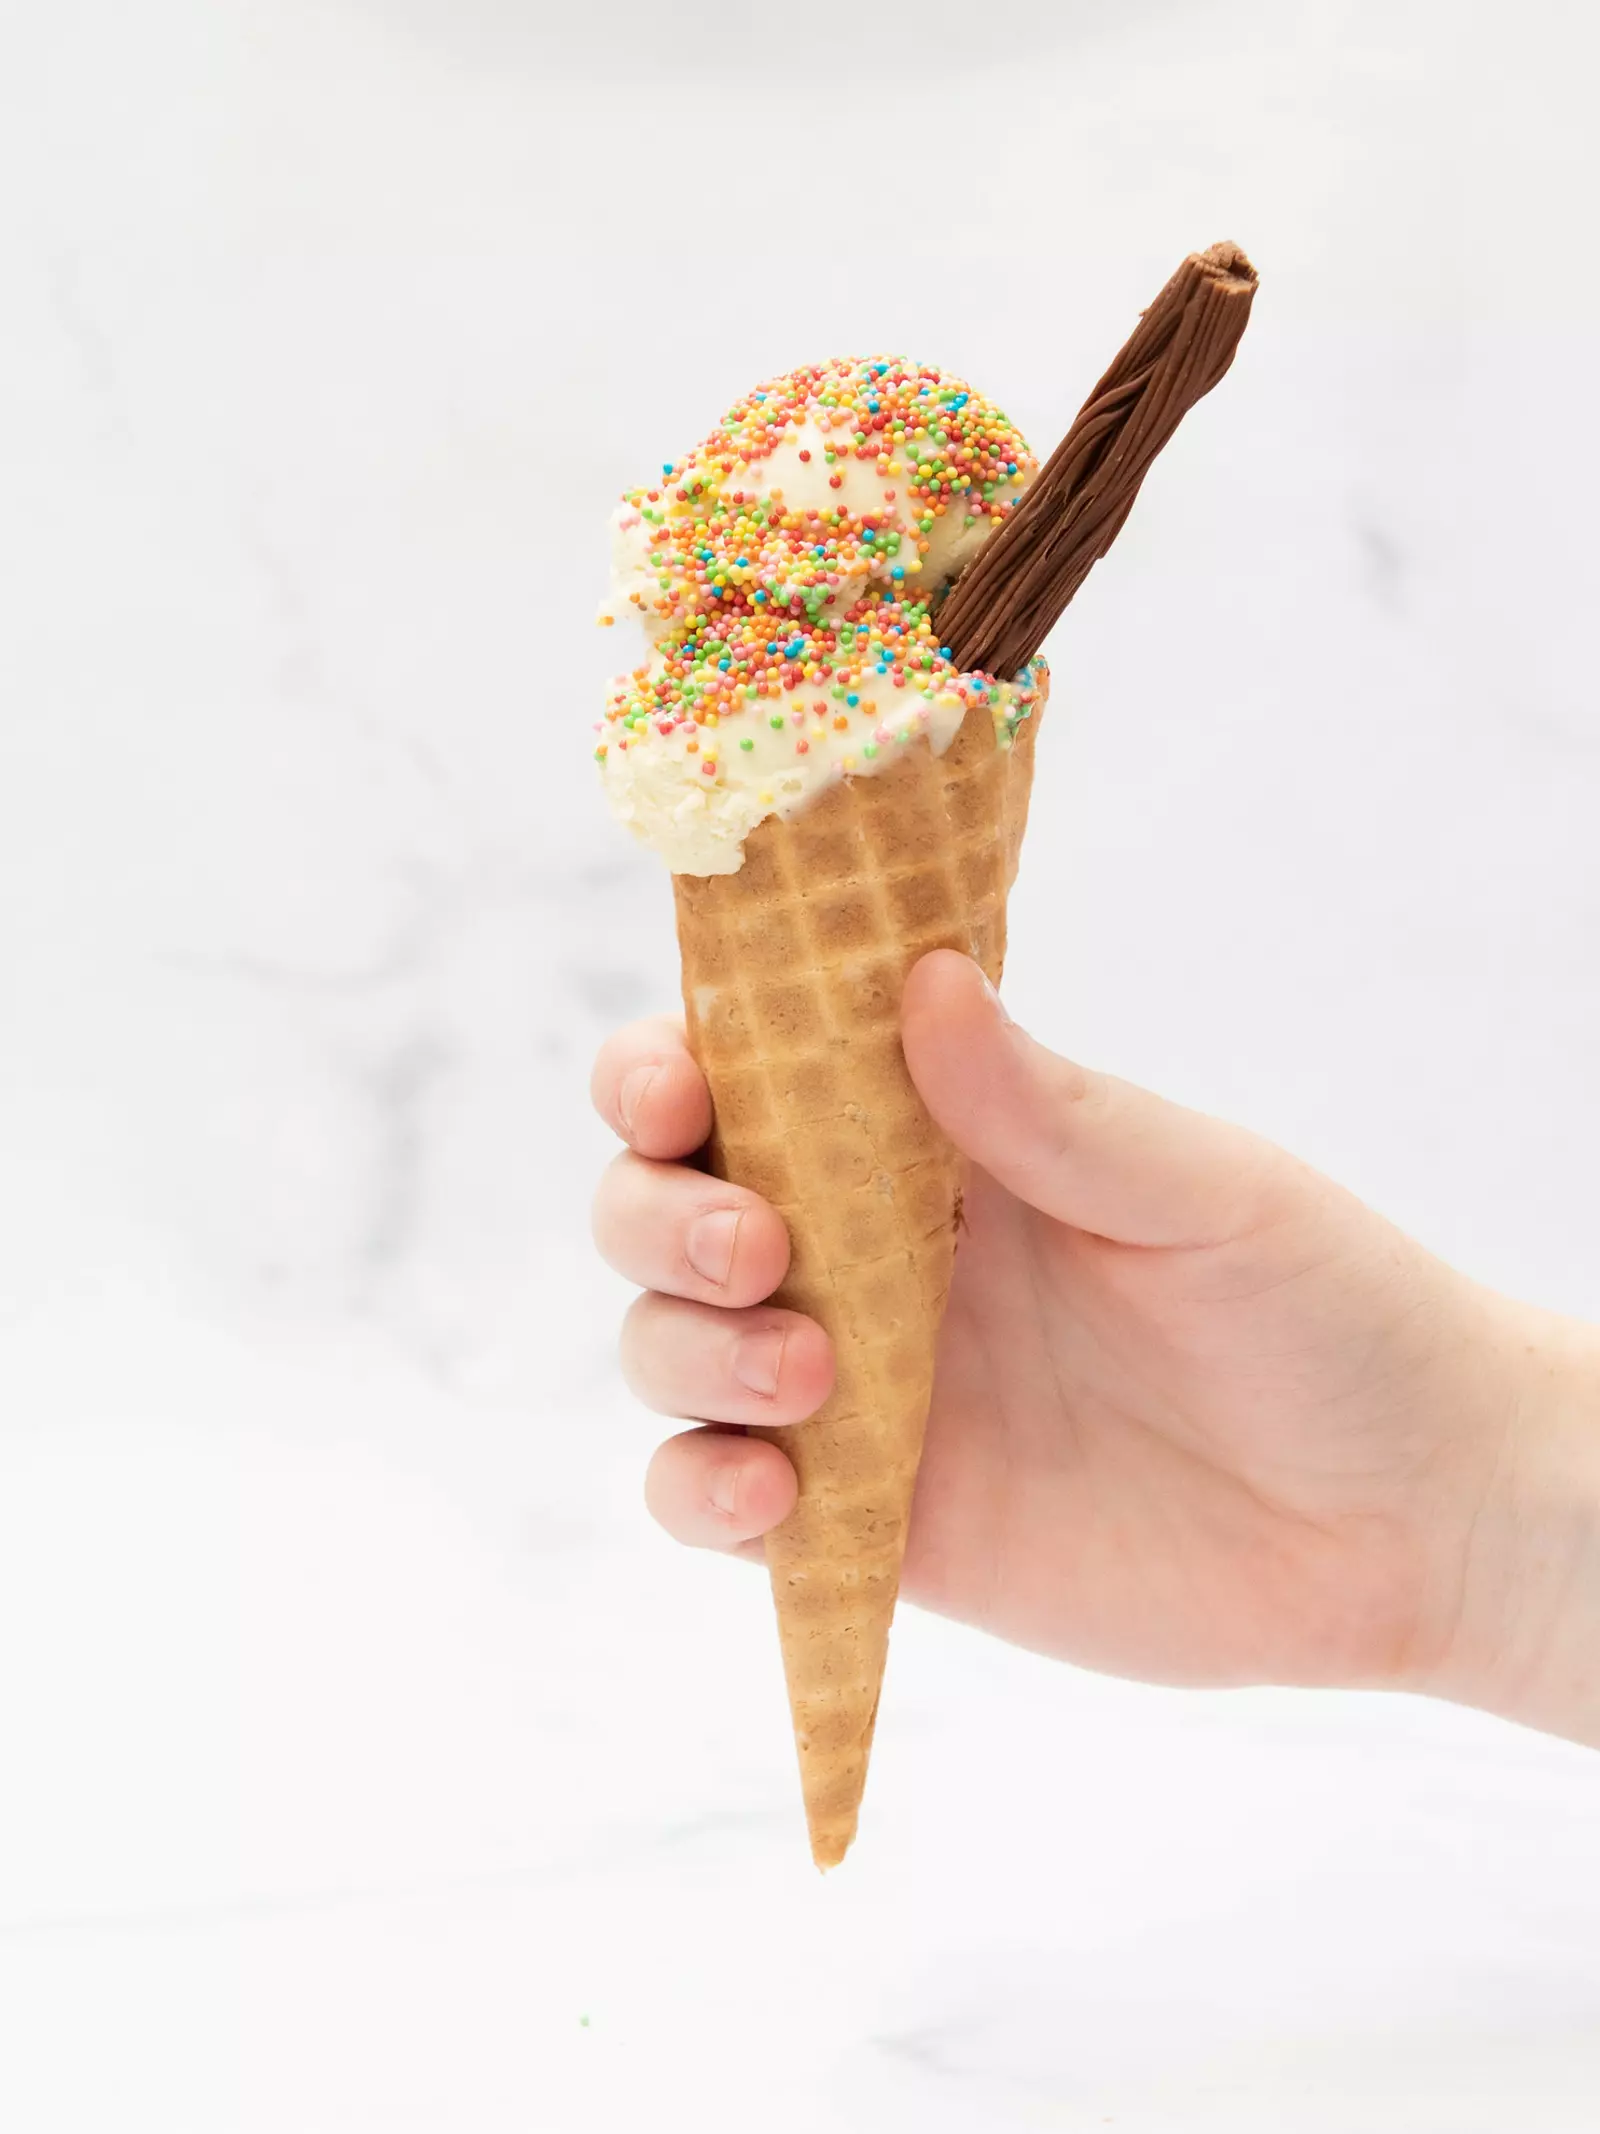 A child's hand holding an ice cream cone topped with a chocolate flake and colourful sprinkles